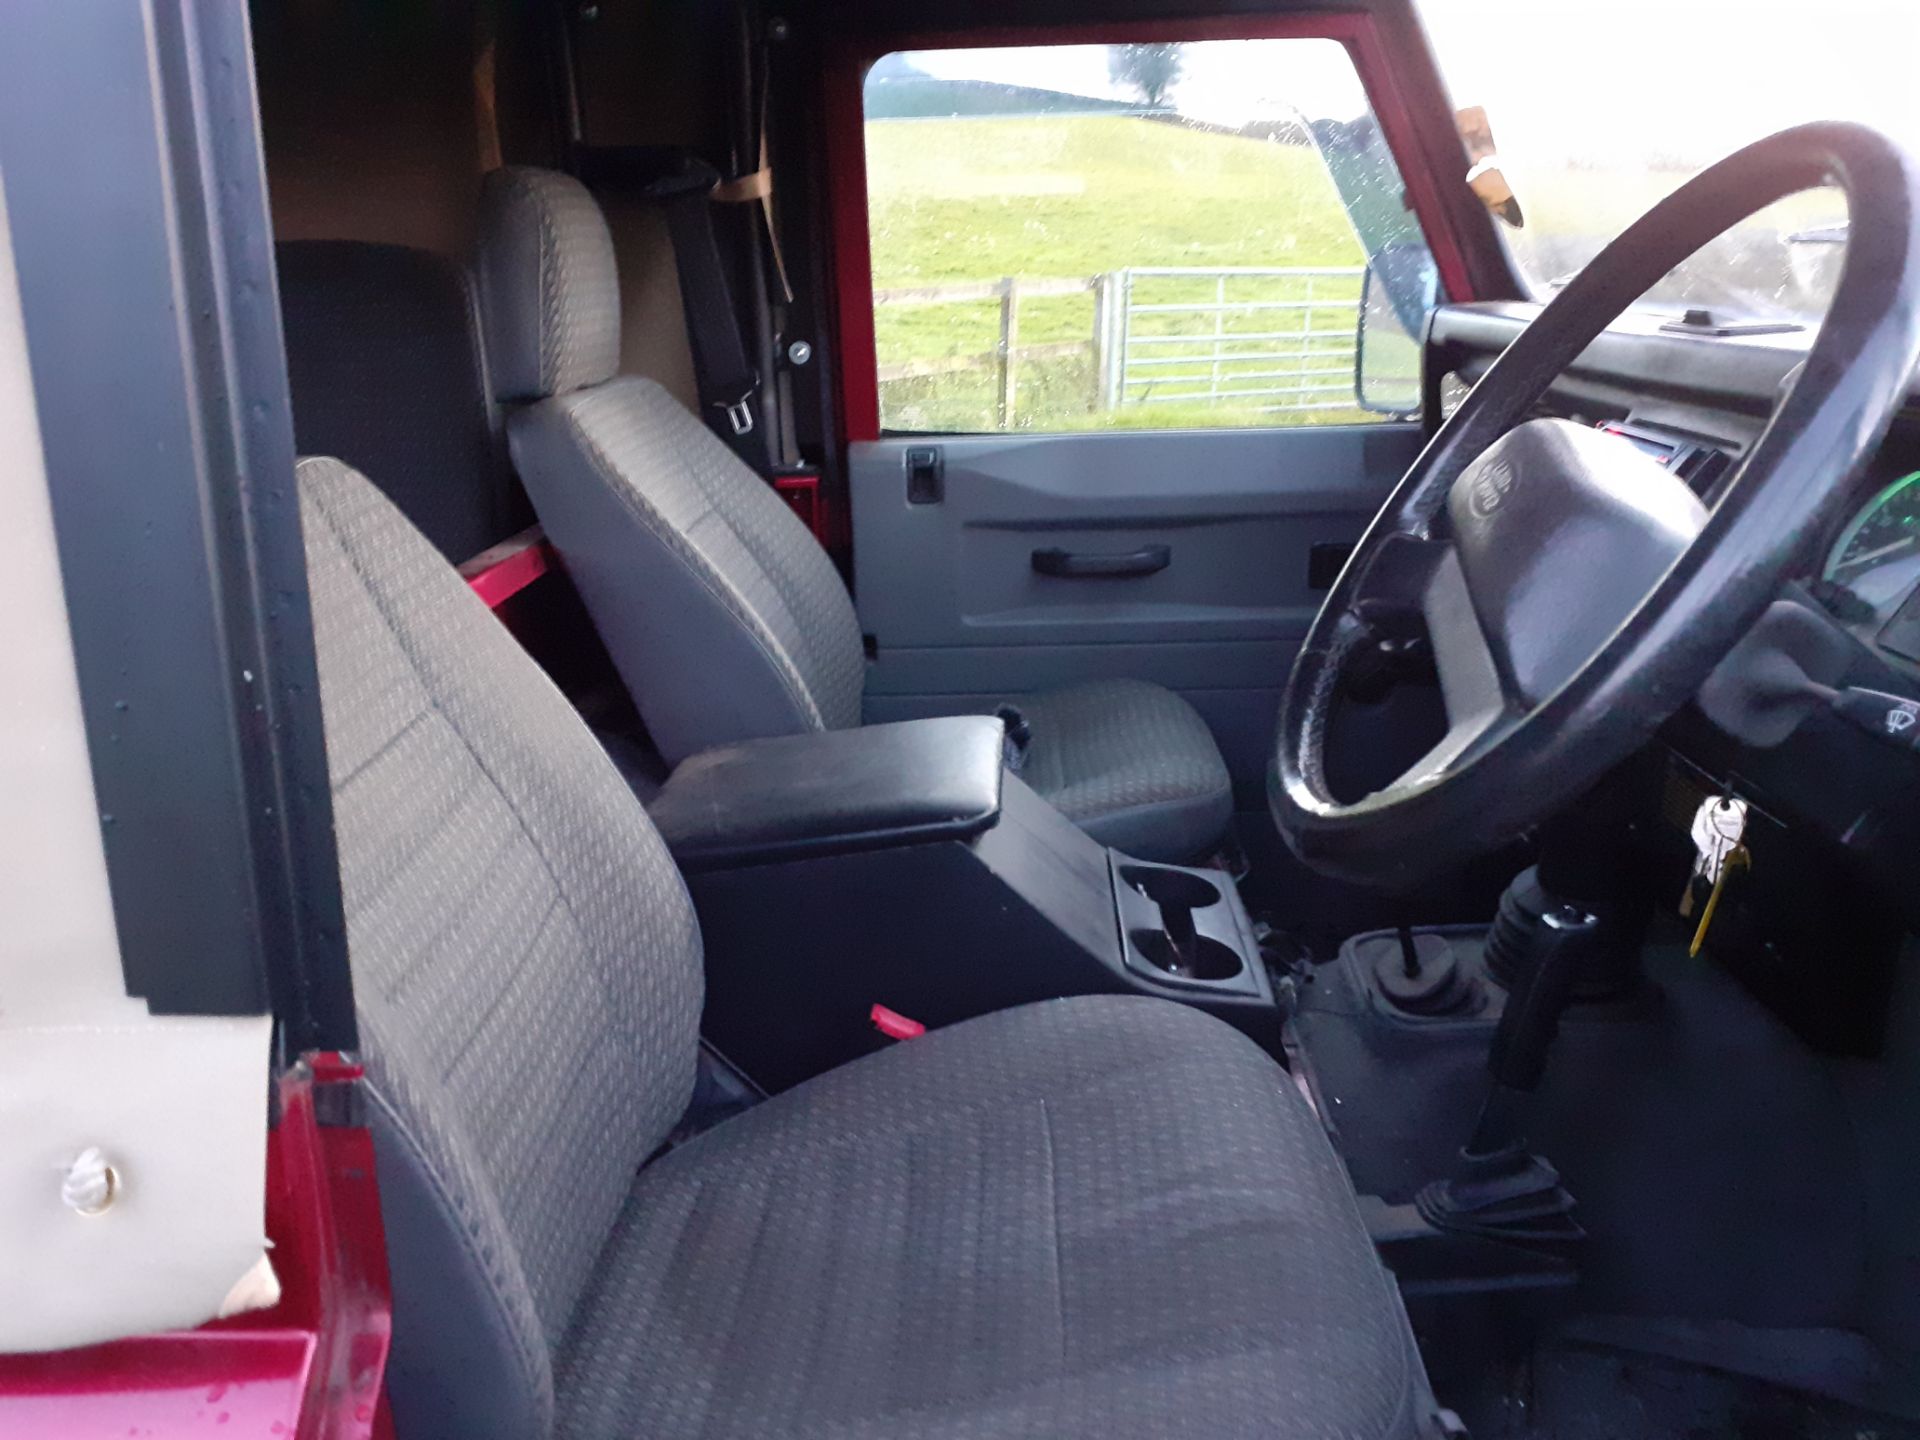 1998/R REG LAND ROVER DEFENDER 90 CSW TDI 95 RED CONVERTIBLE 6 SEATER, SHOWING 2 FORMER KEEPERS - Image 8 of 9